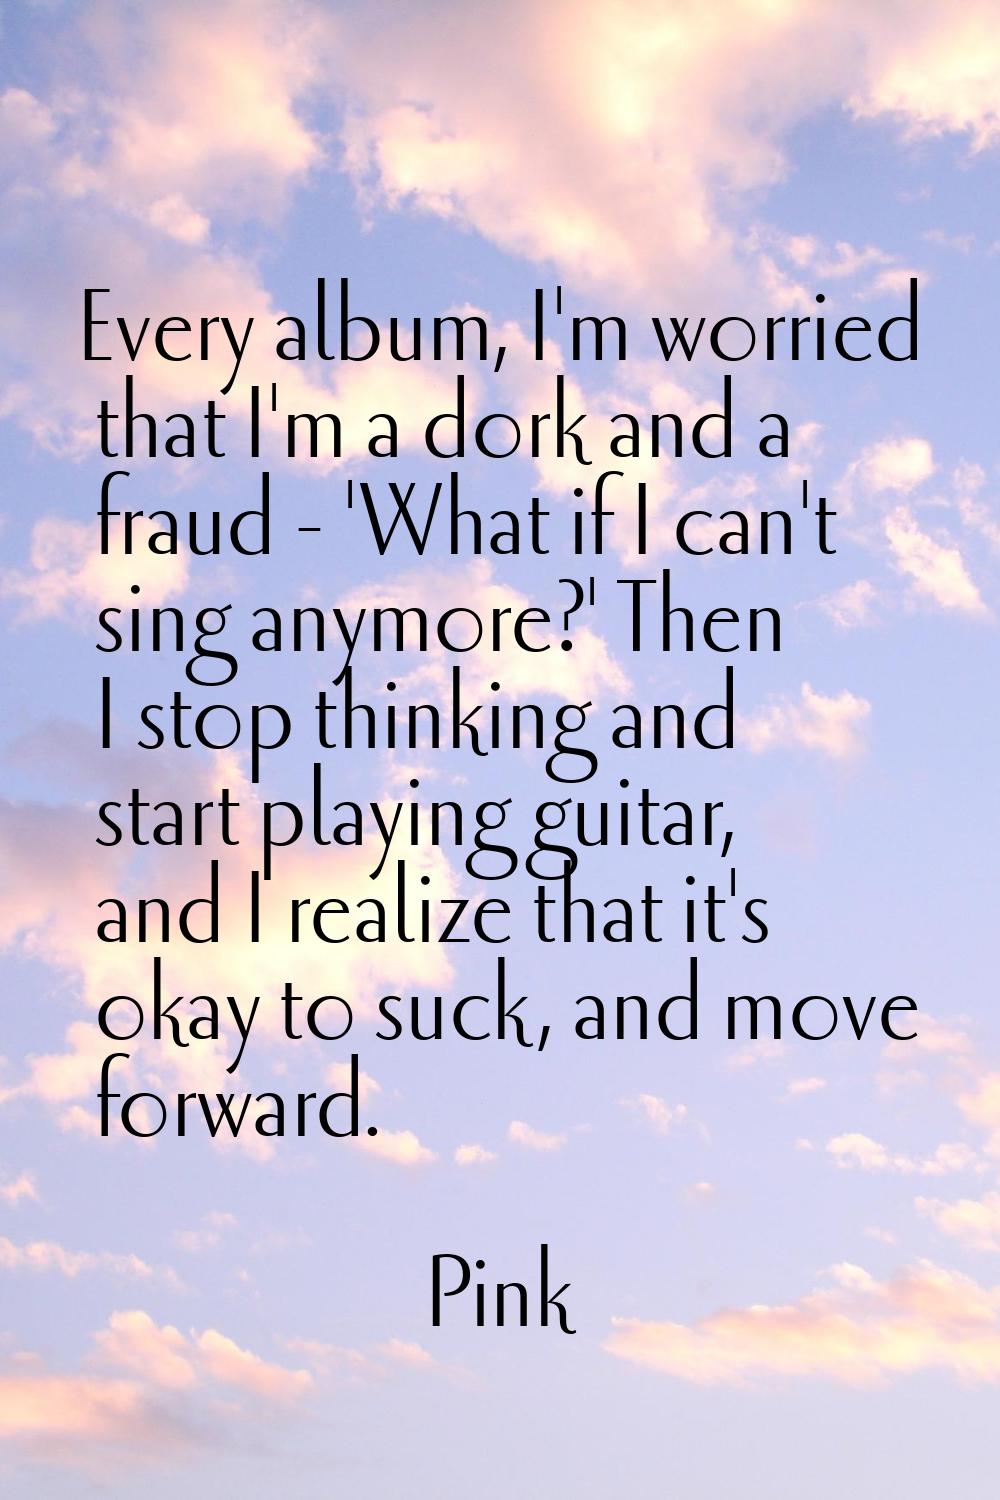 Every album, I'm worried that I'm a dork and a fraud - 'What if I can't sing anymore?' Then I stop 